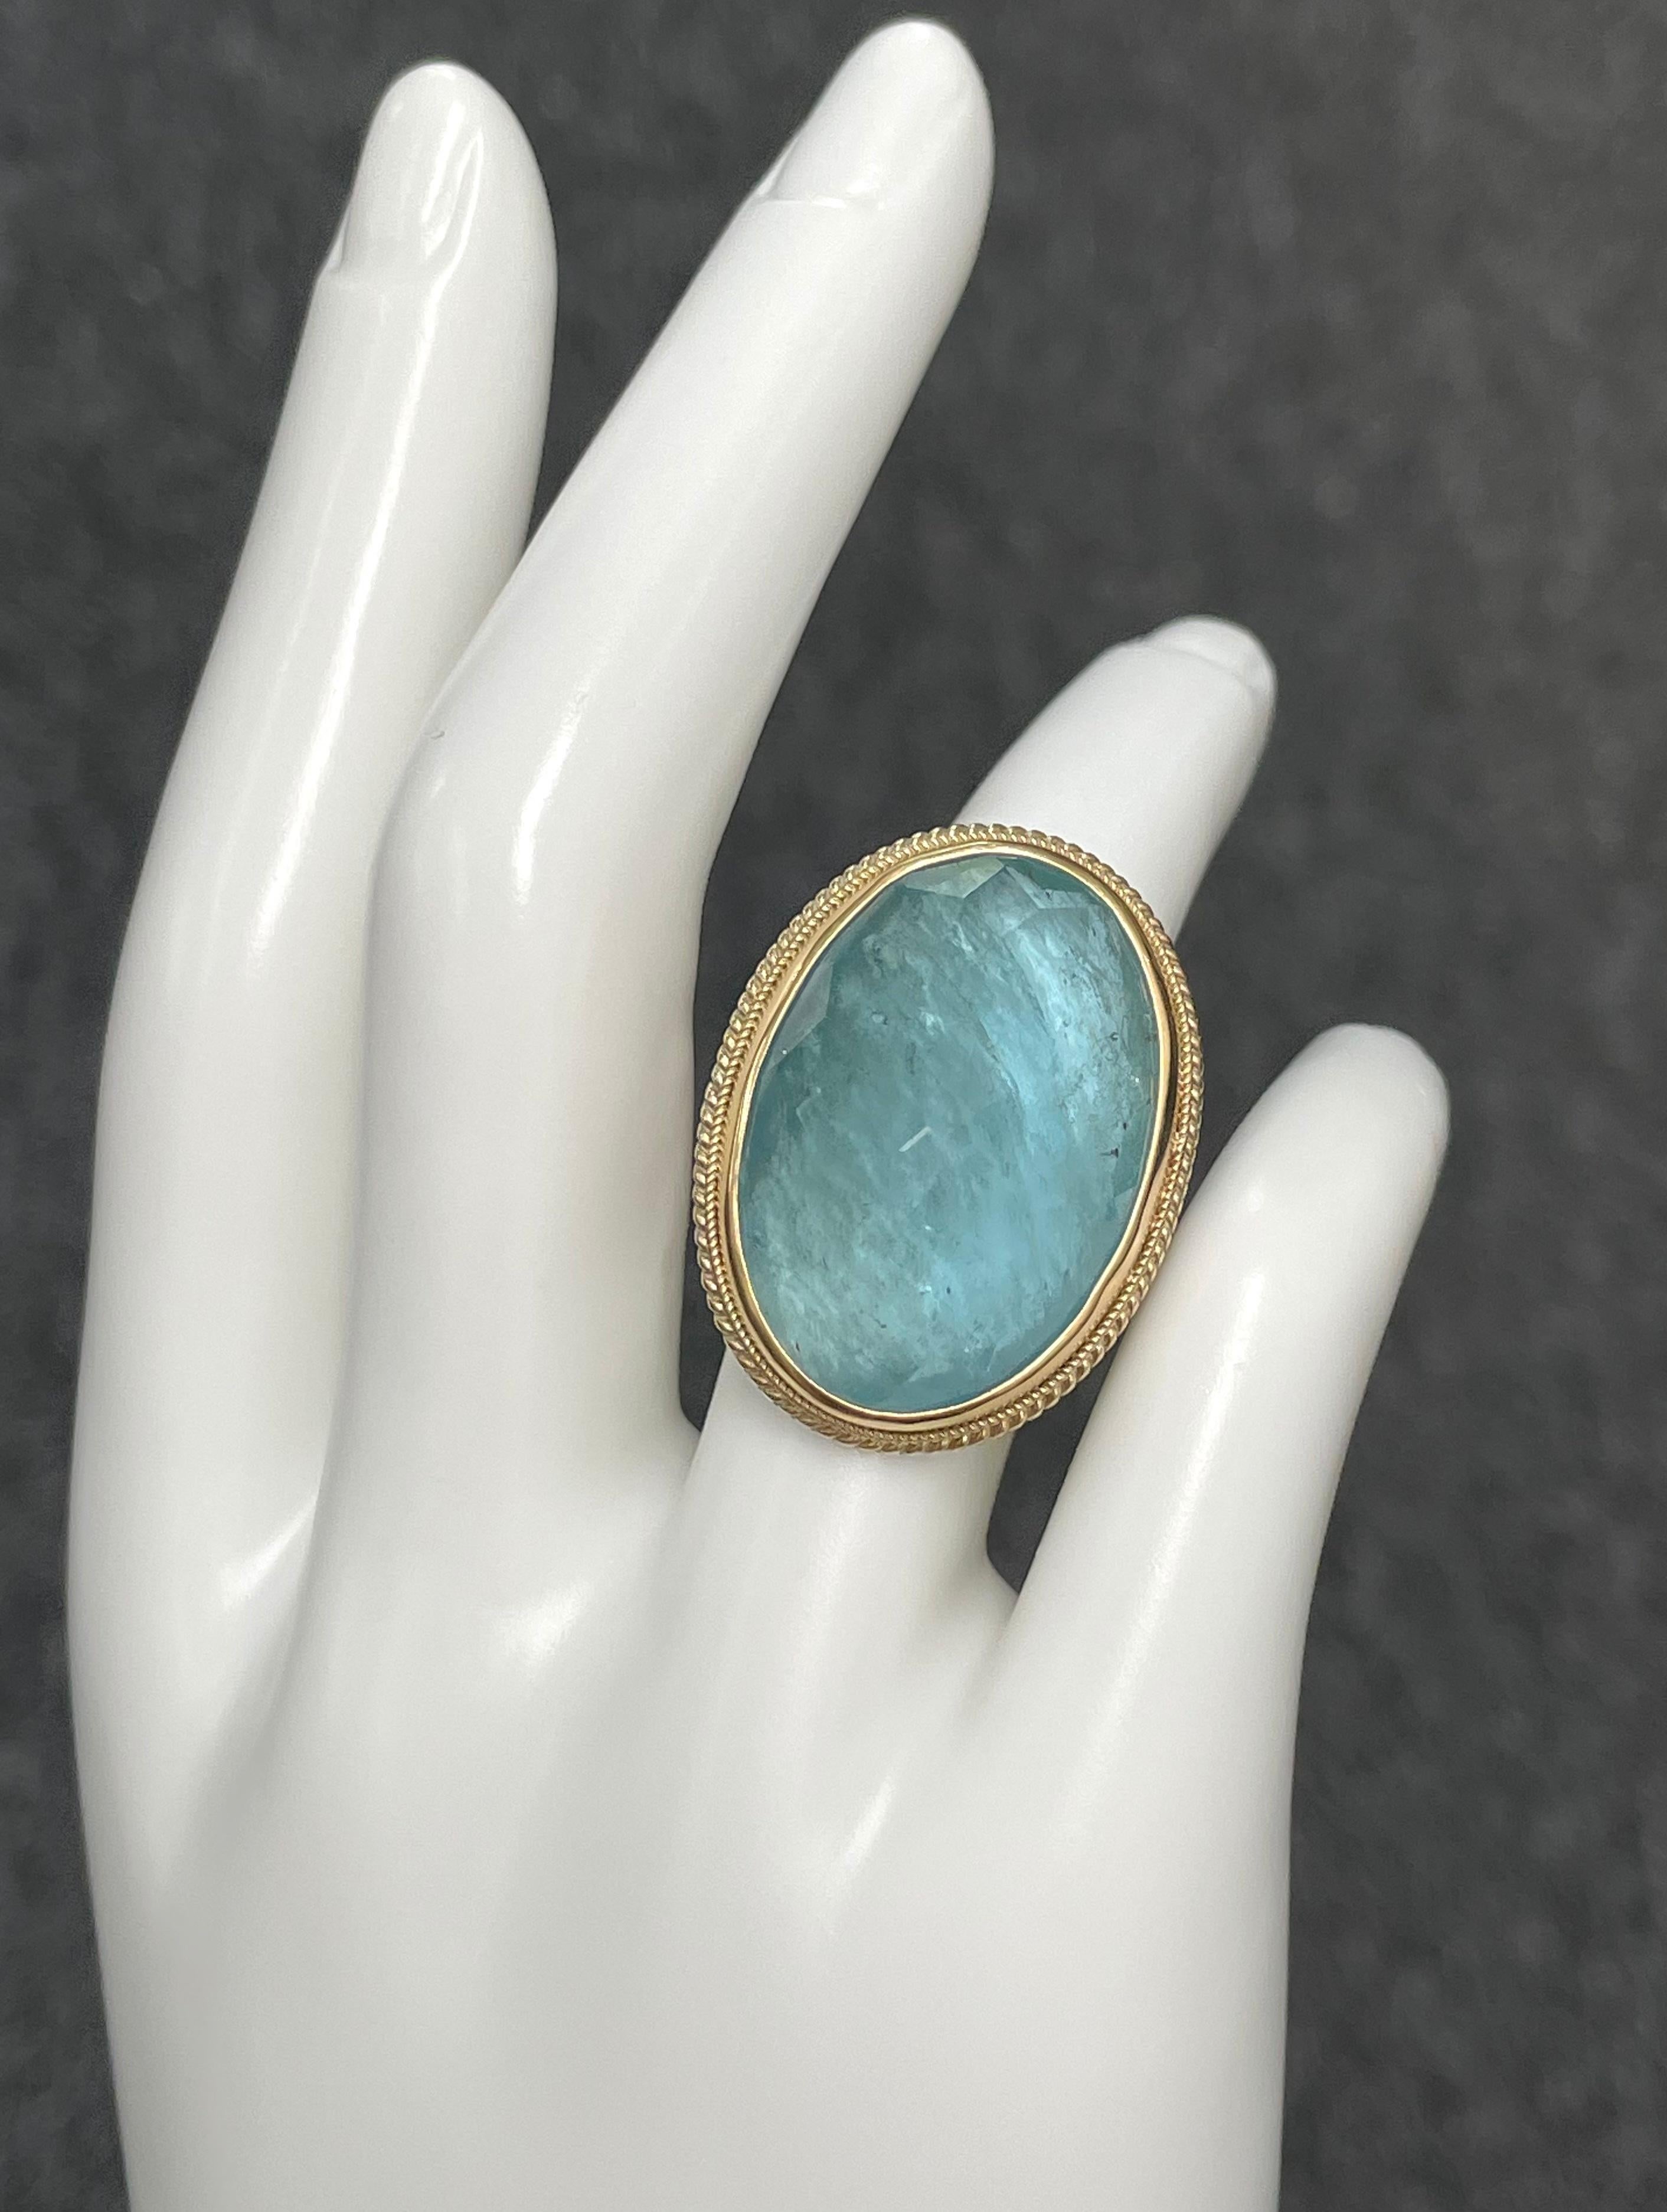 Steven Battelle 36 Carat Rose Cut Aquamarine 18K Gold/Silver Ring In New Condition For Sale In Soquel, CA